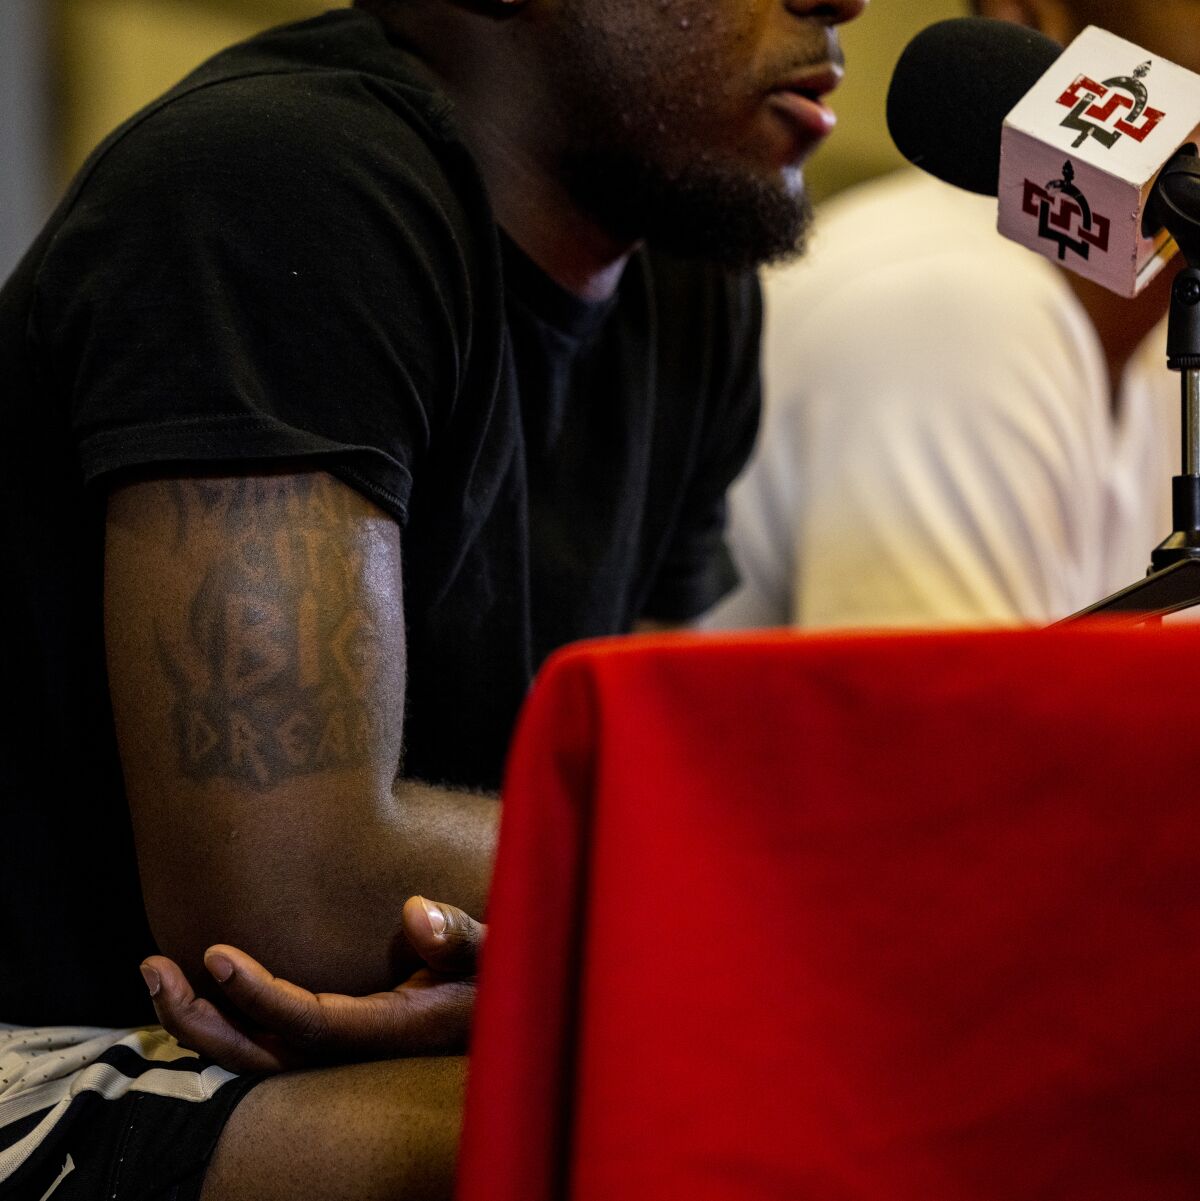 Darrion Trammell has a tattoo on his right bicep reading "Small City Big Dreams"